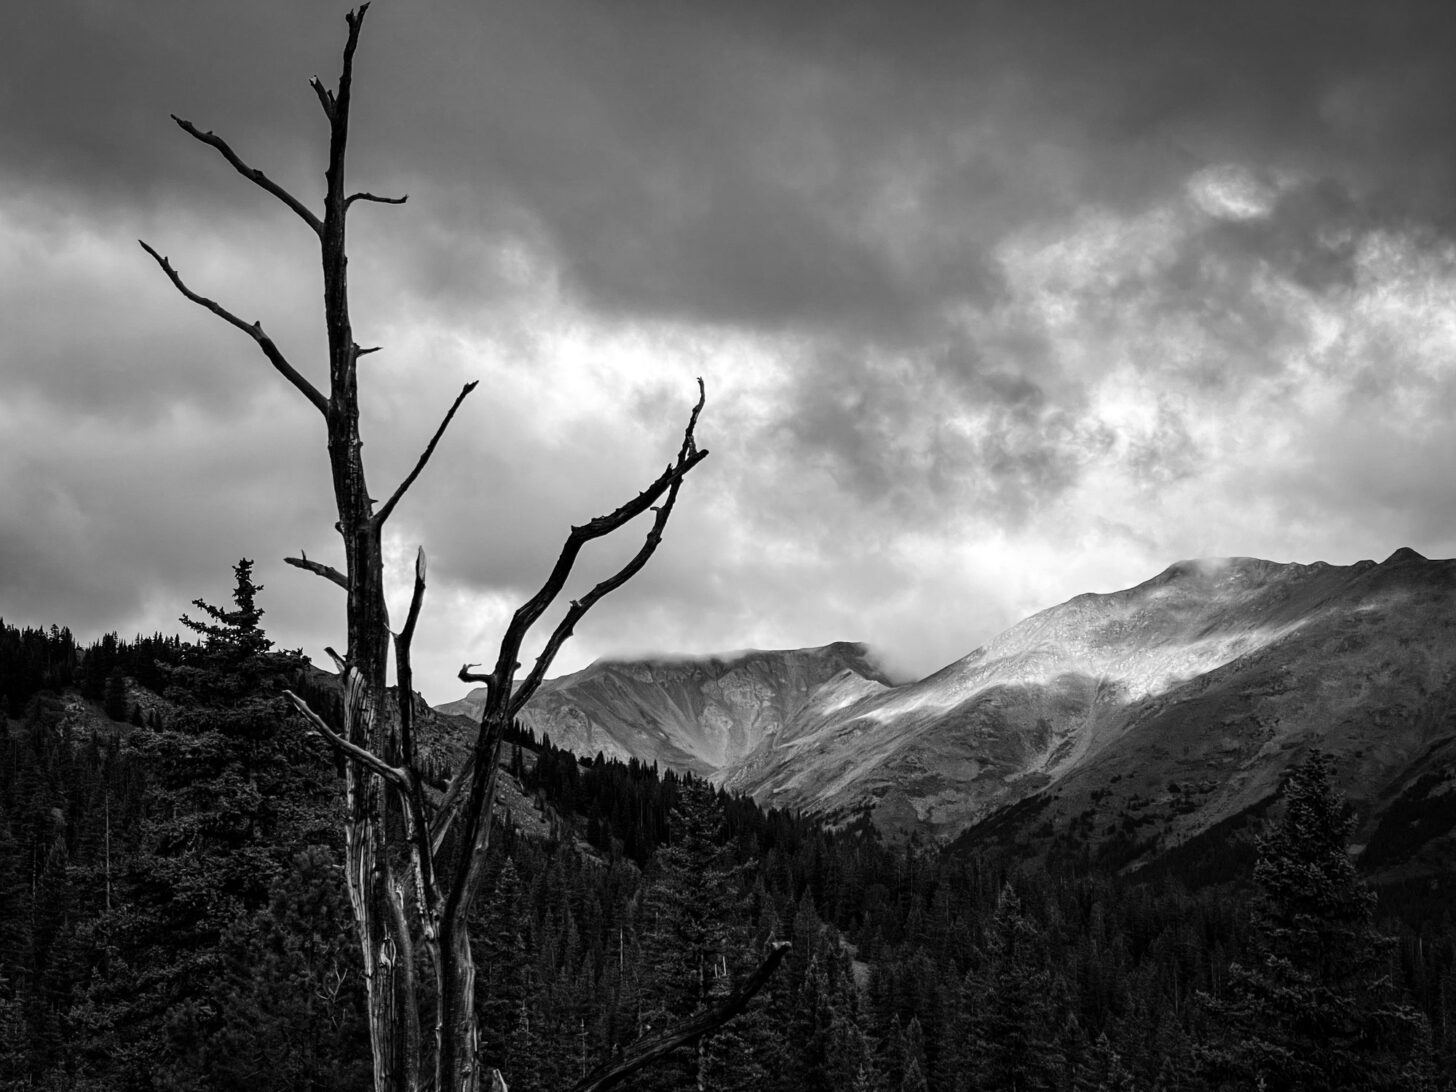 a dead tree in the foreground, mountains and clouds in the background